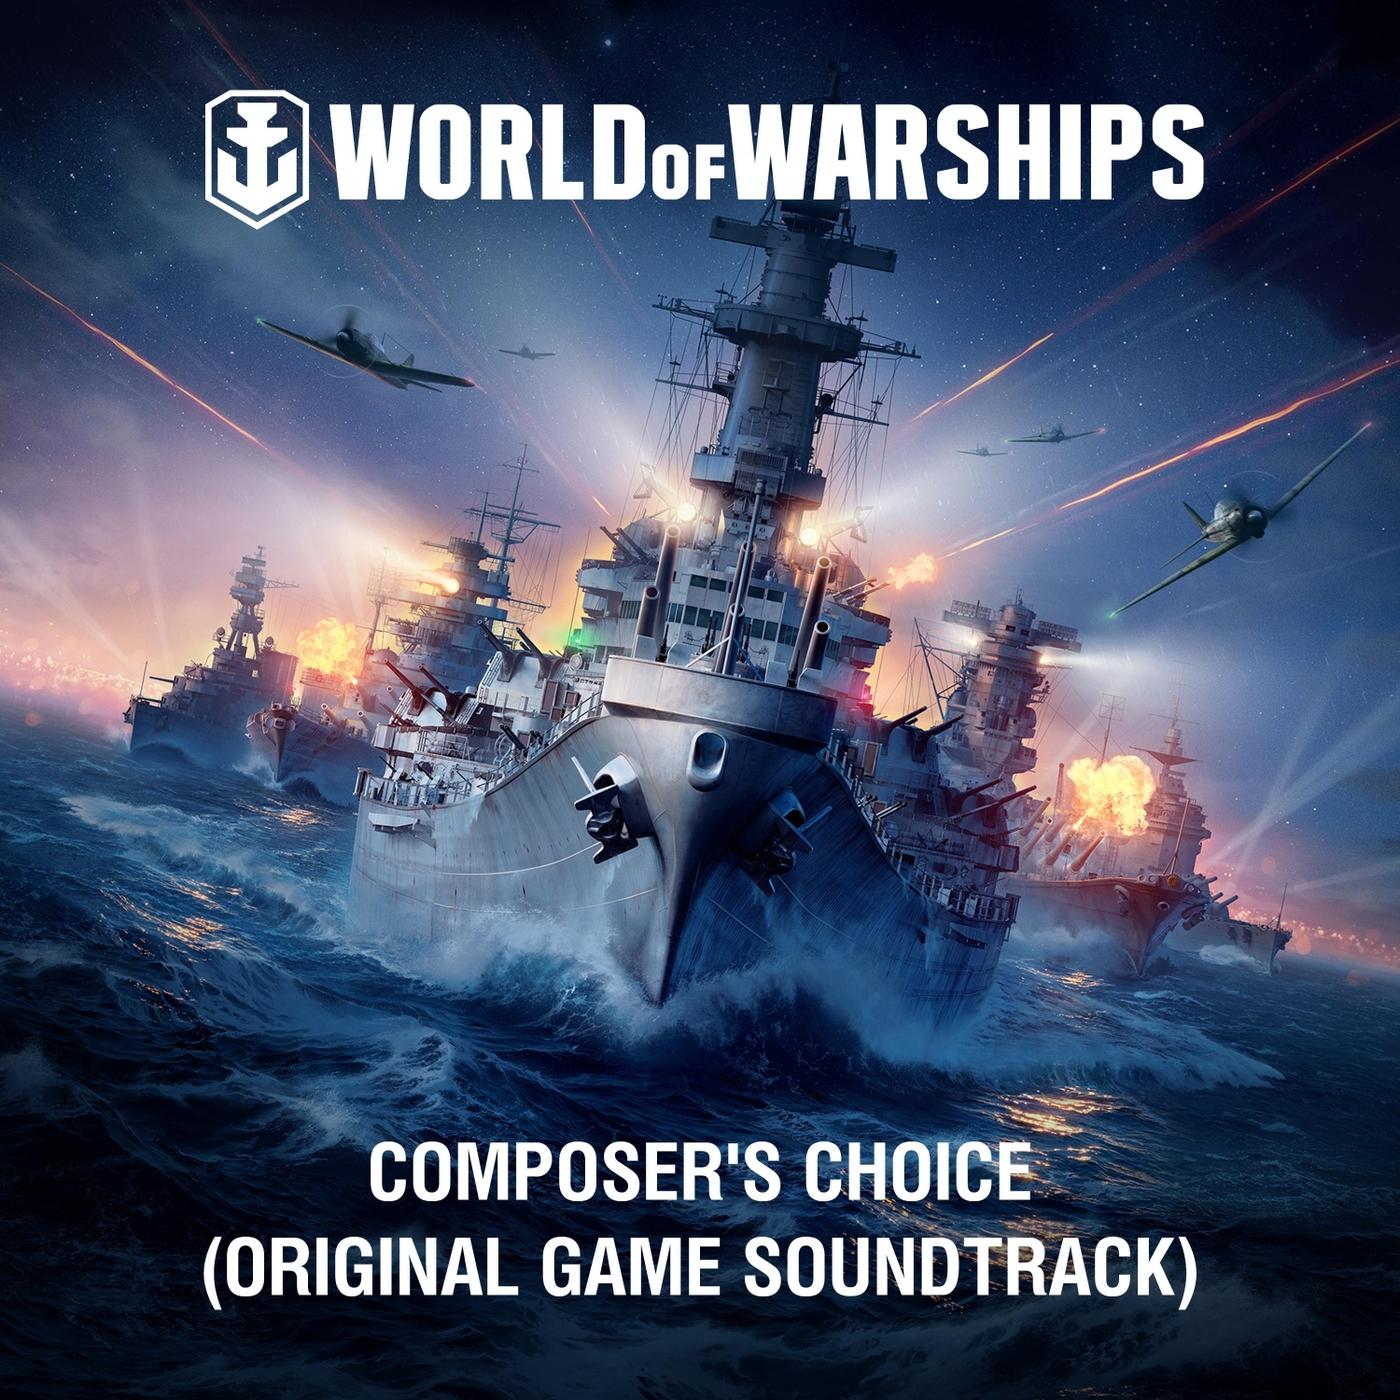 World of Warships: Composer’s Choice (Original Game Soundtrack)